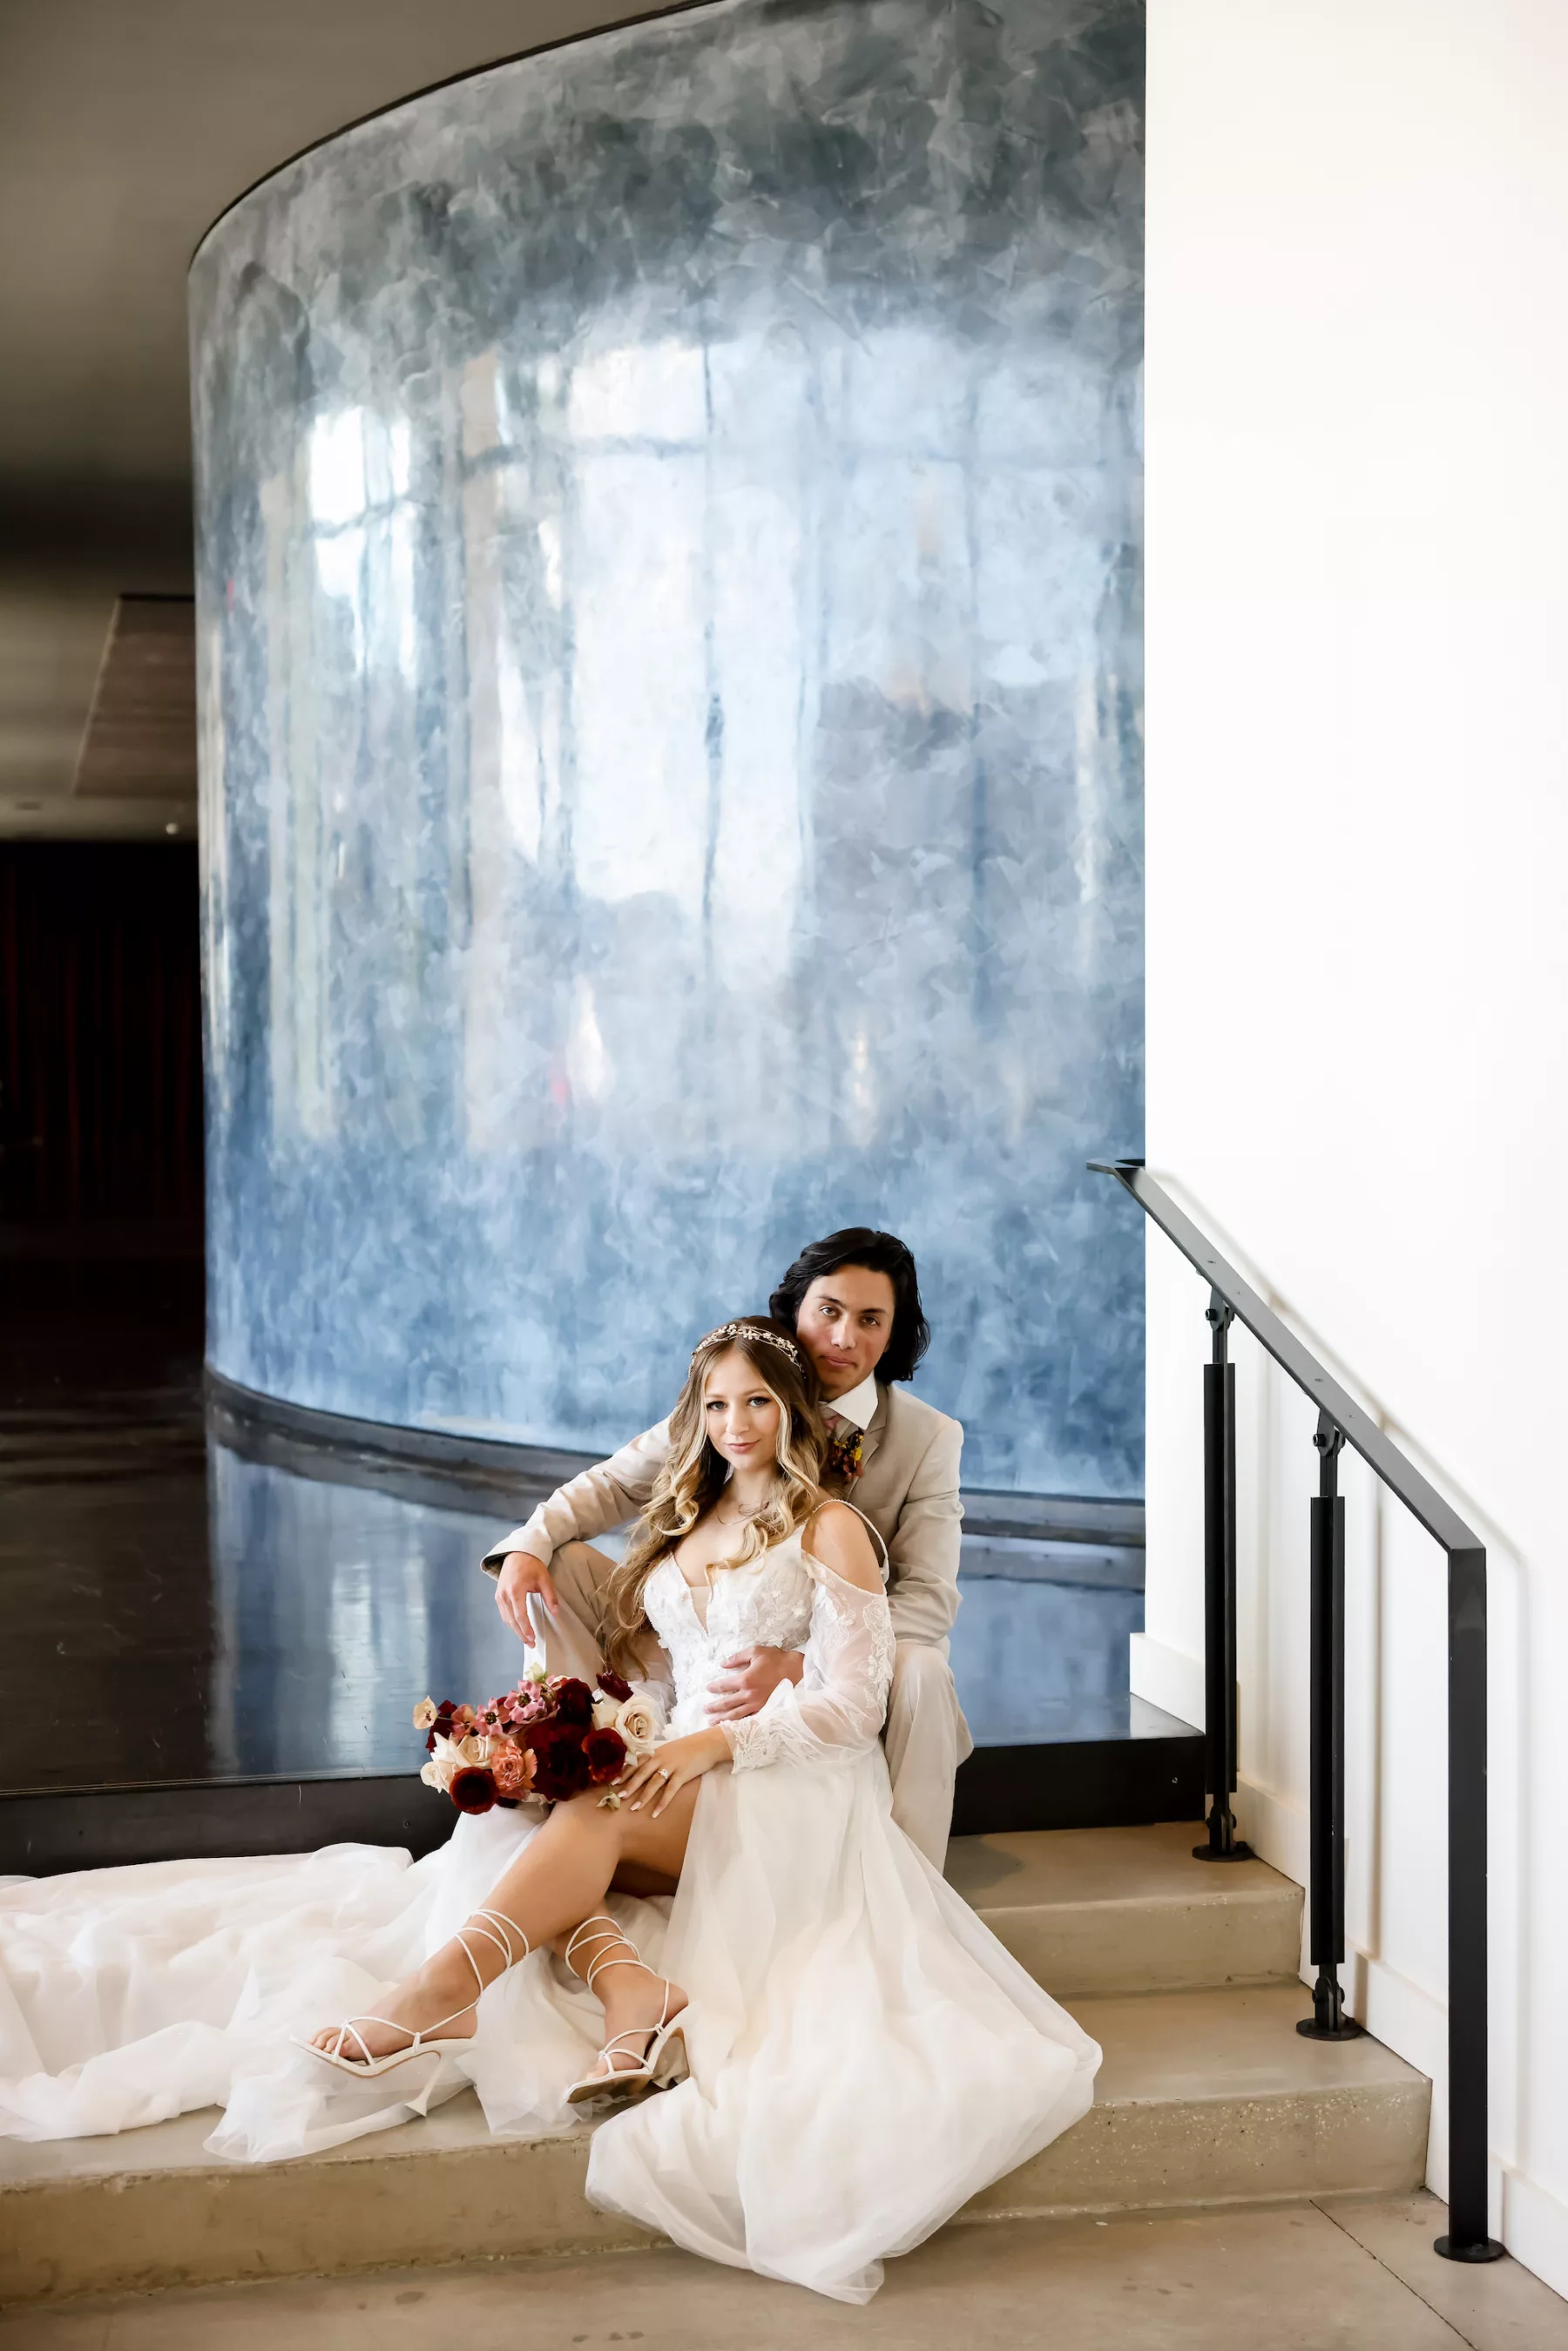 Bride and Groom Wedding Day Portrait | Tampa Bay Event Venue Hotel Haya | Photographer Lifelong Photography Studio | Hair and Makeup Artist Adore Bridal Services